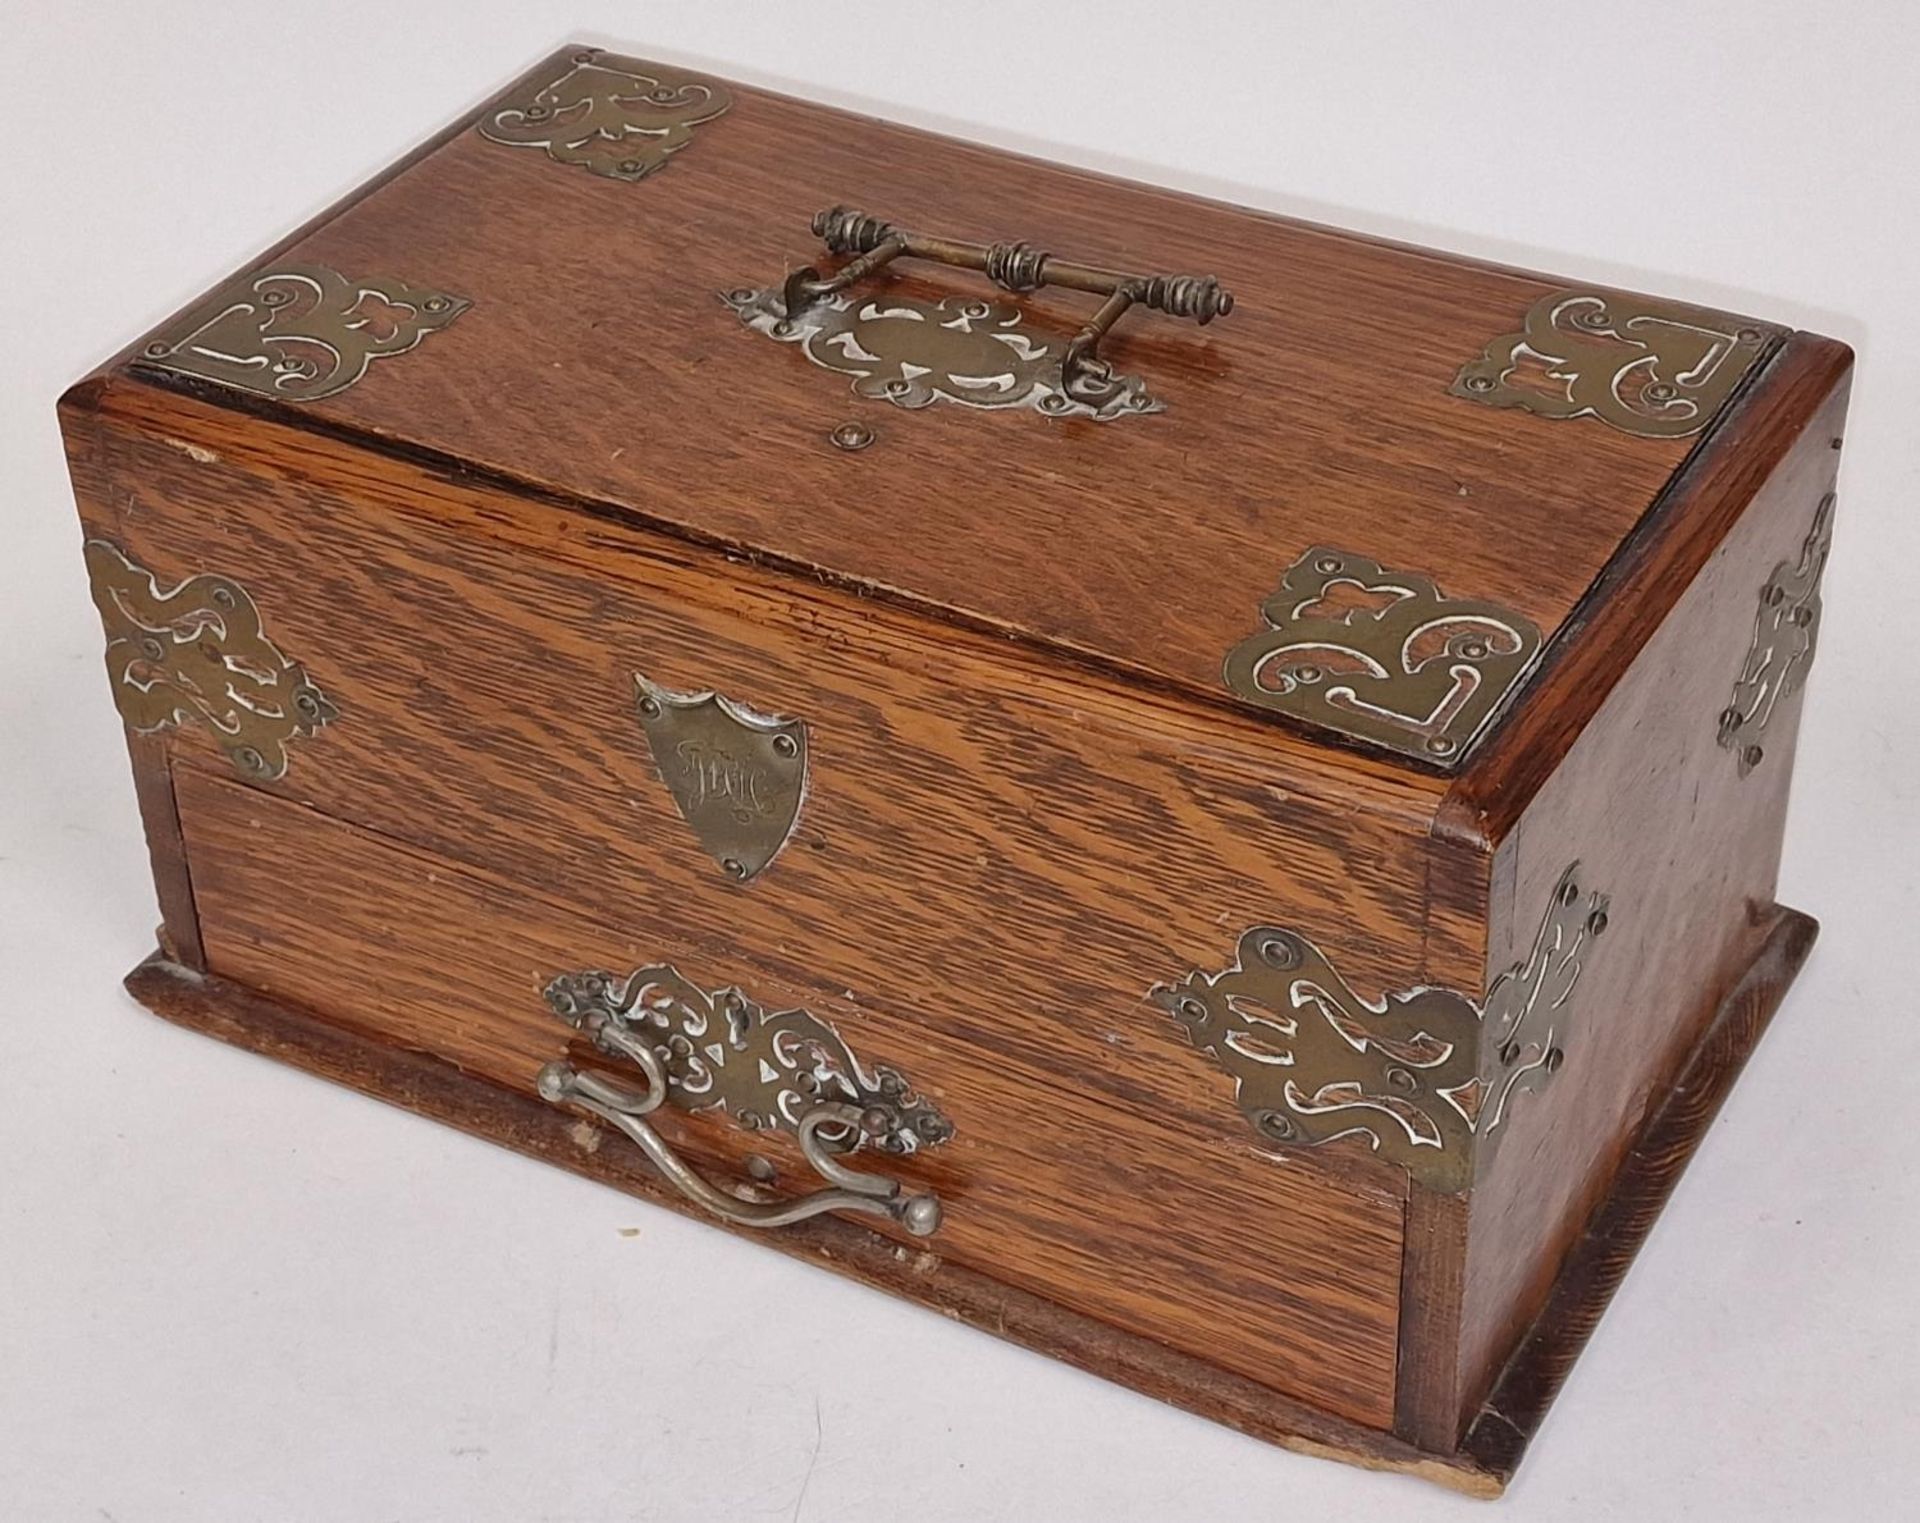 Antique English oak gentlemans cigar box with brass embellishments. - Image 3 of 3